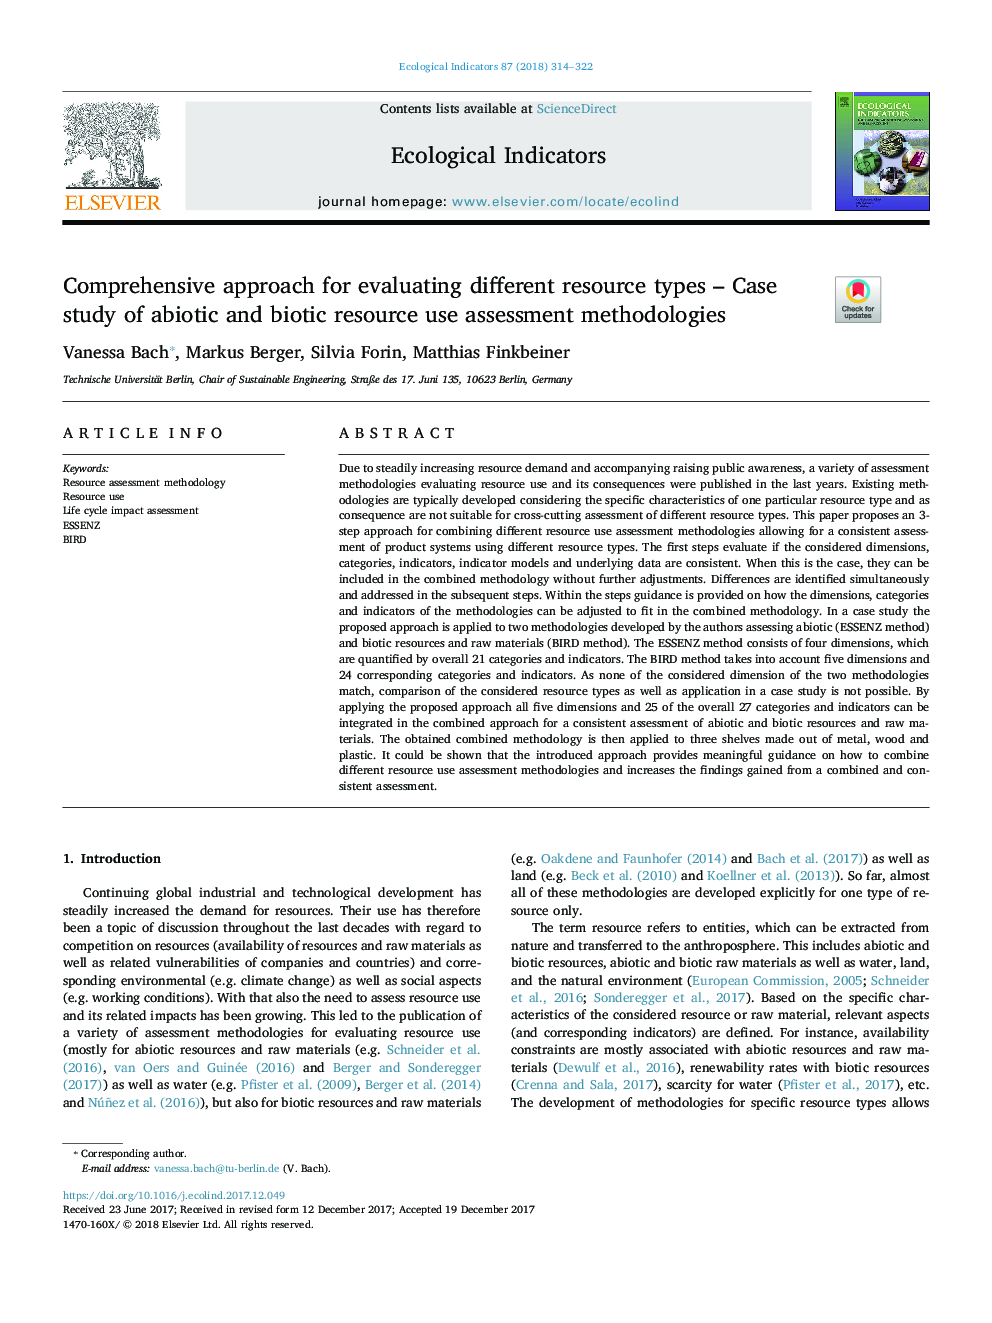 Comprehensive approach for evaluating different resource types - Case study of abiotic and biotic resource use assessment methodologies